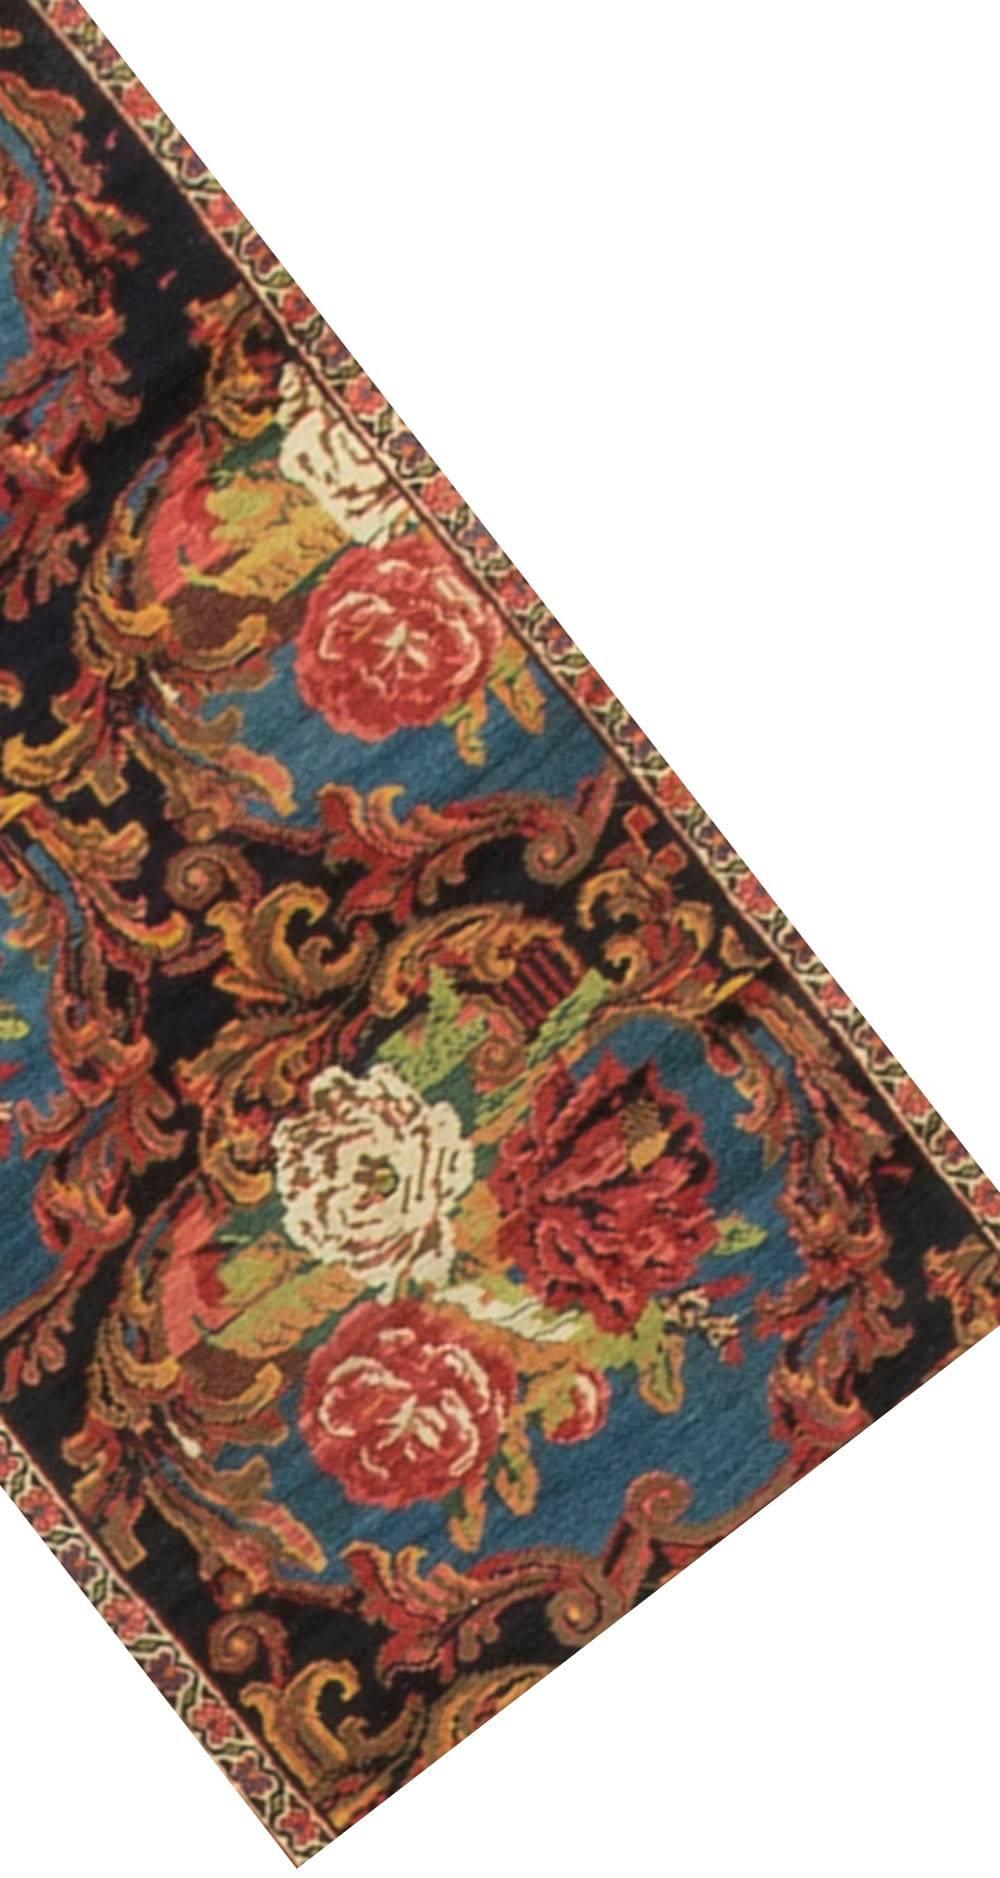 Antique Persian Golfarang Bidjar circa 1900. This beautiful runners style is larger floral elements which are found in the famous Golfarang design all in the typical beautiful colors of this famous pattern. Golfarang is translated to mean 'foreign